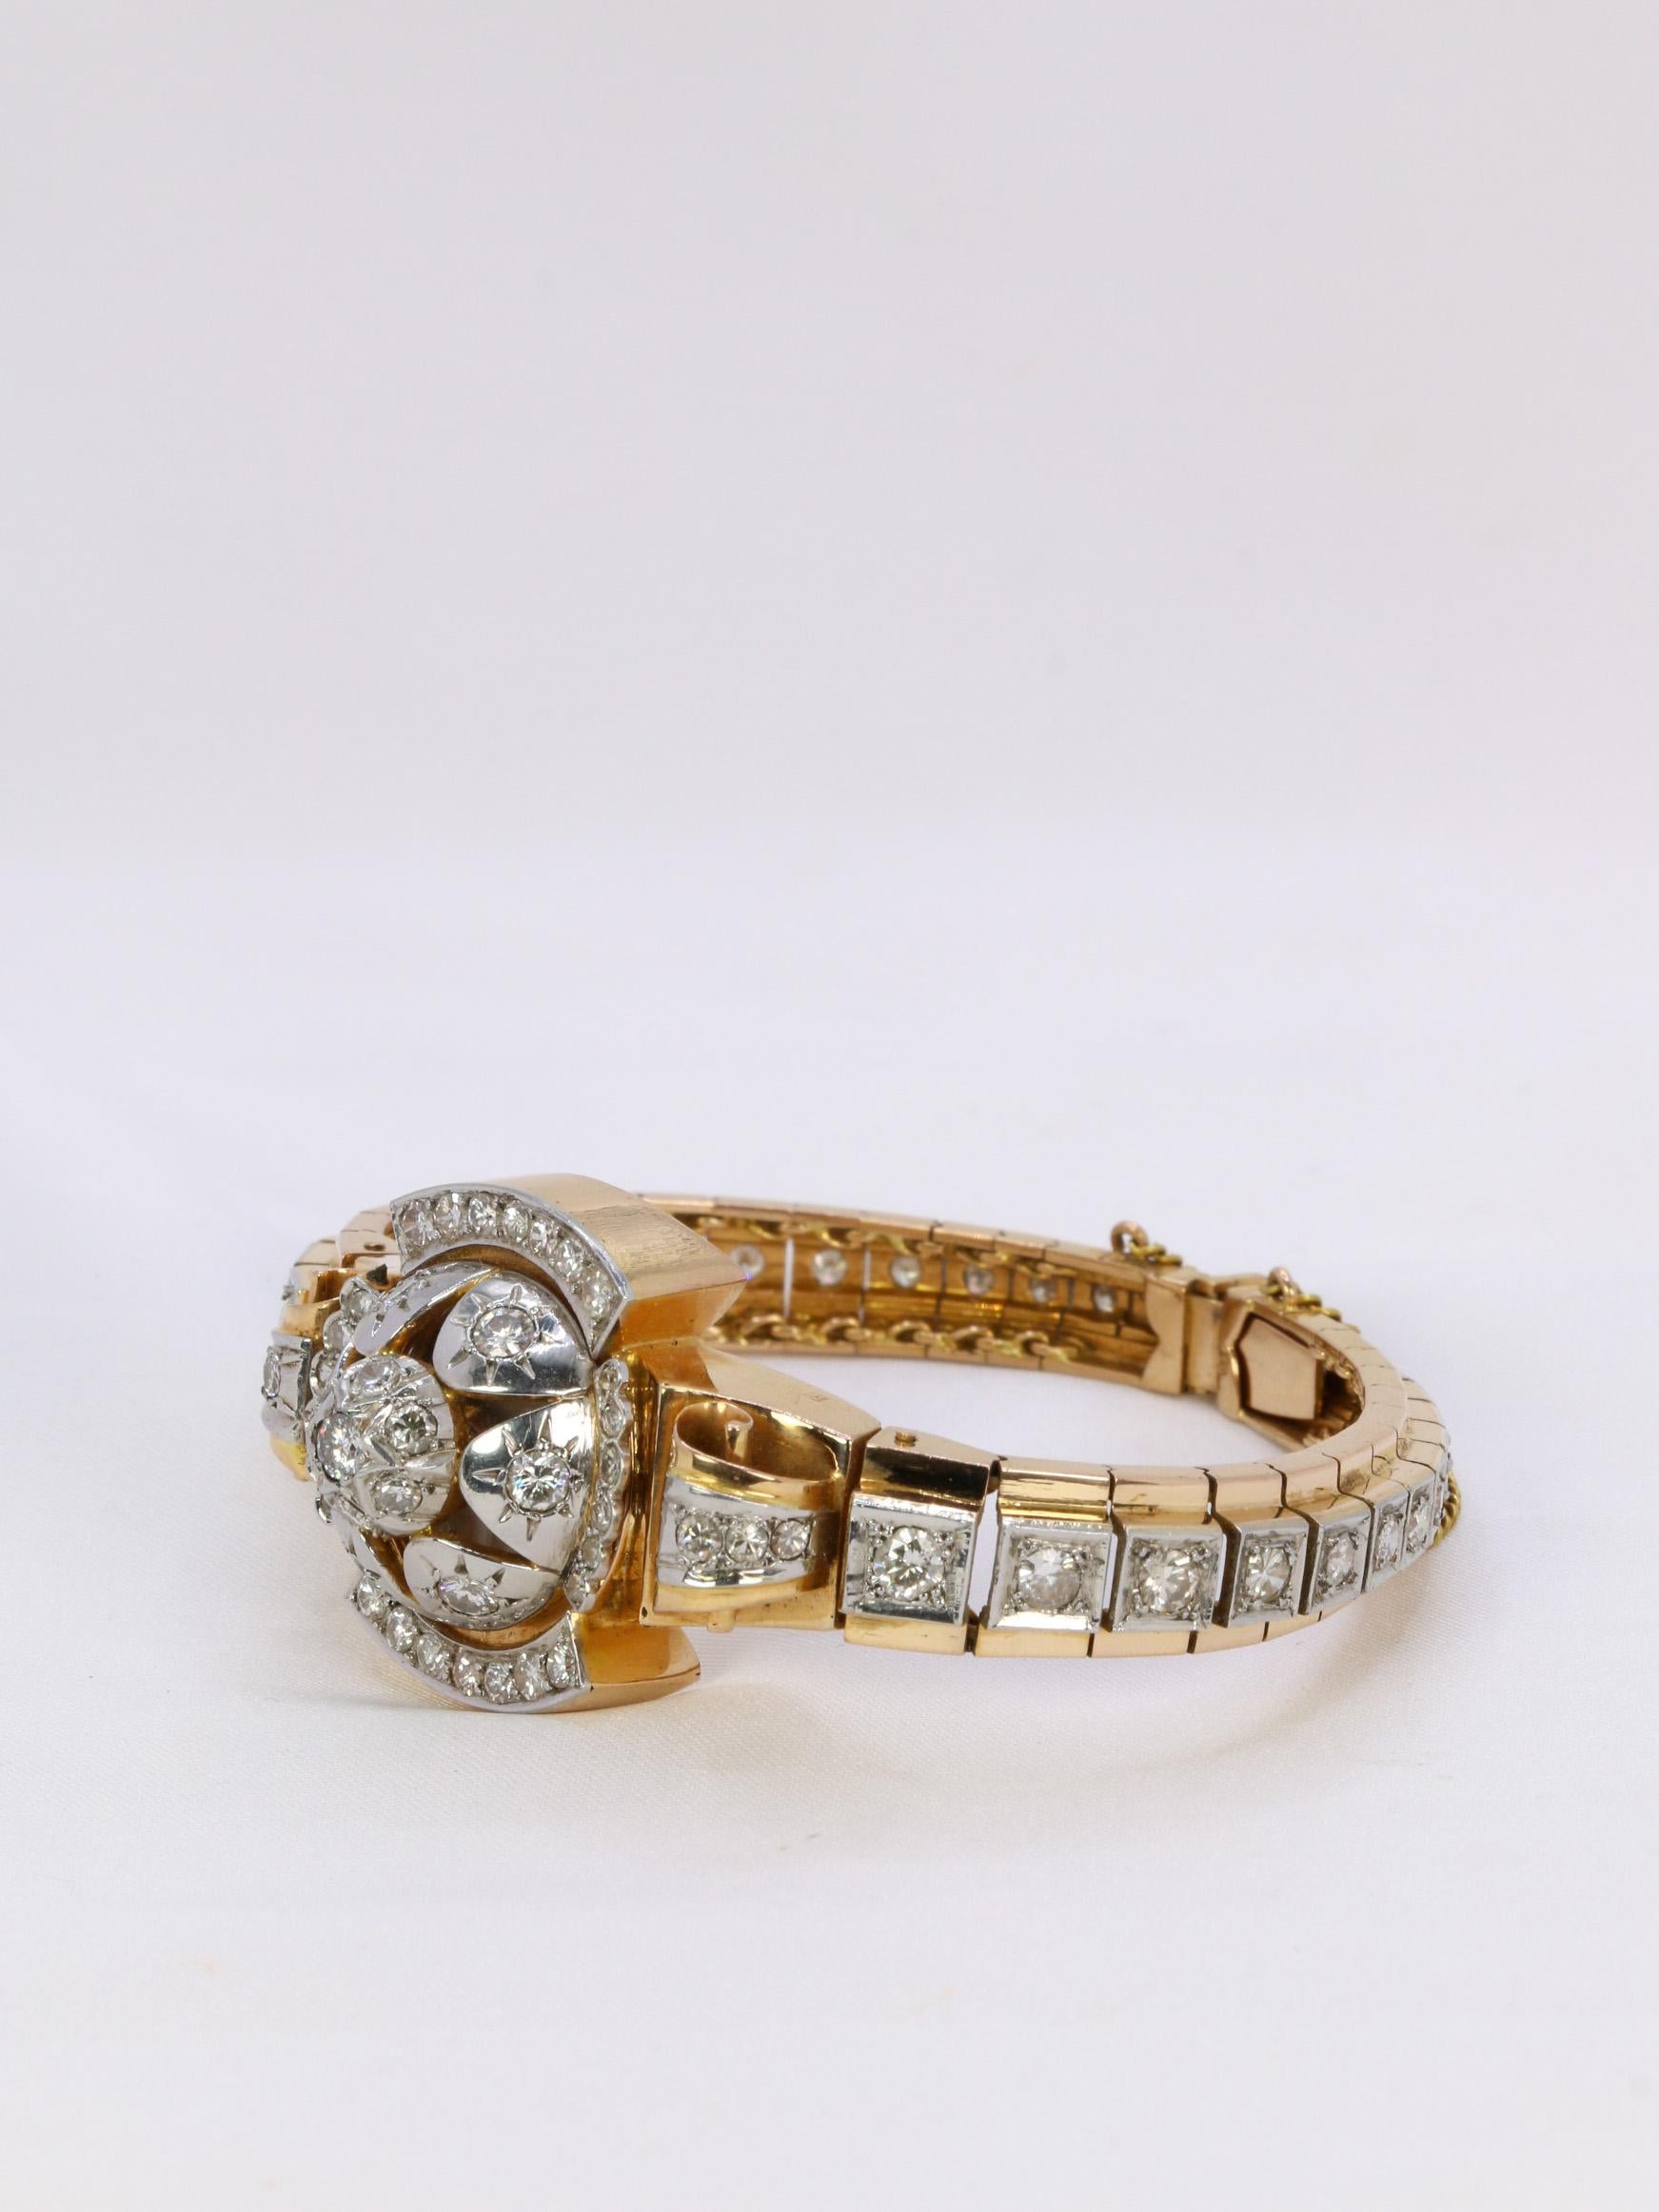 Vintage Watch Bracelet in yellow gold and diamonds, 1950 For Sale 2